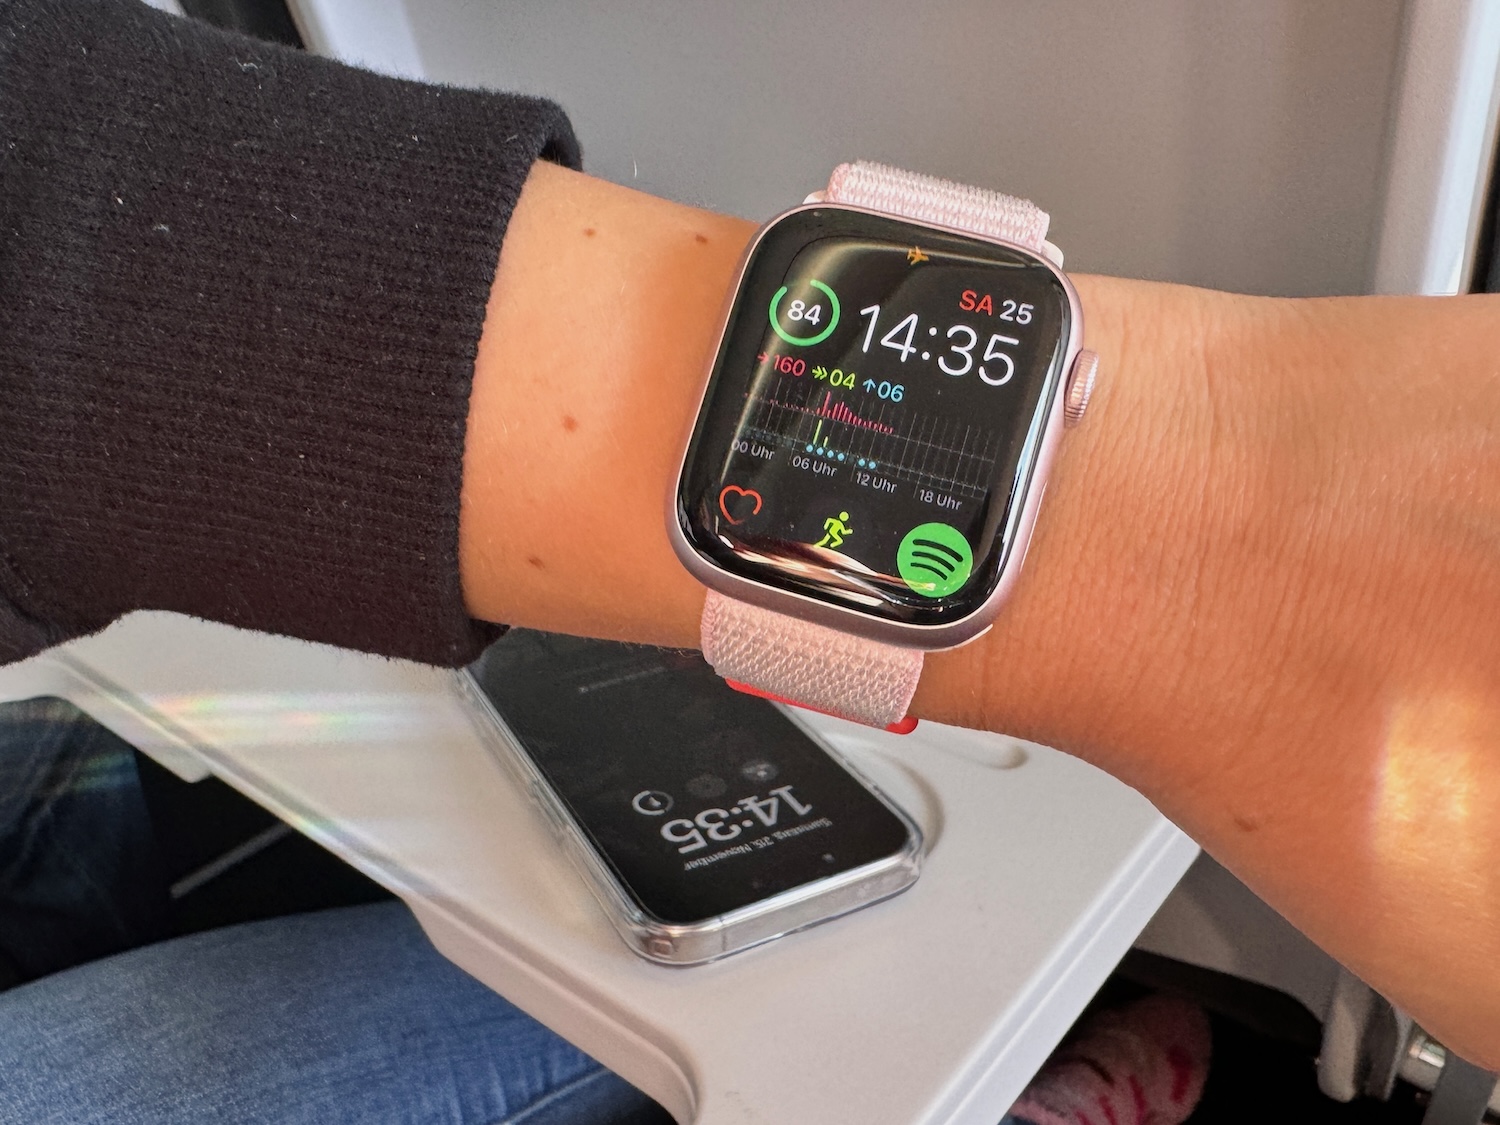 The bright display is also impressive - the smartwatch is very easy to read even in strong sunlight and bright environments. Photo: Sascha Tegtmeyer